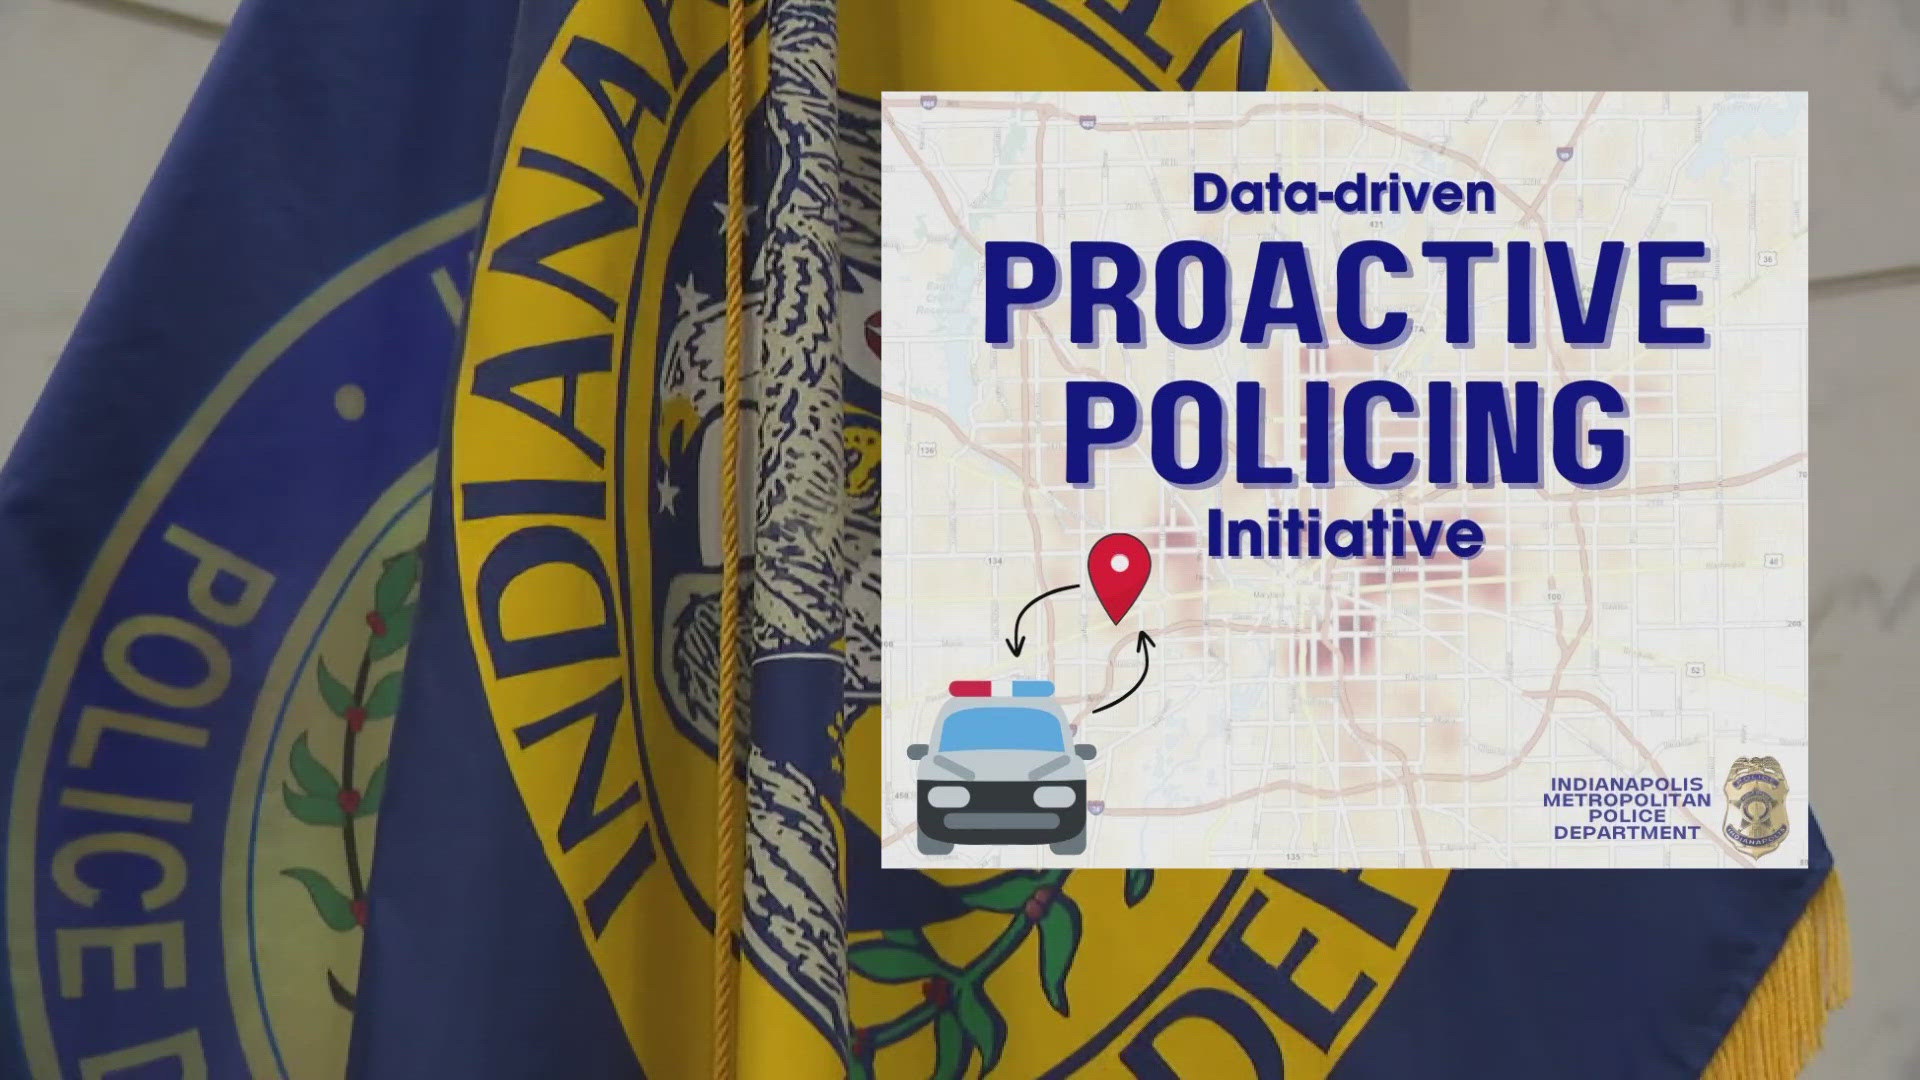 13News reporter Rich Nye breaks down what IMPD plans to do under the "Proactive Policing Program."